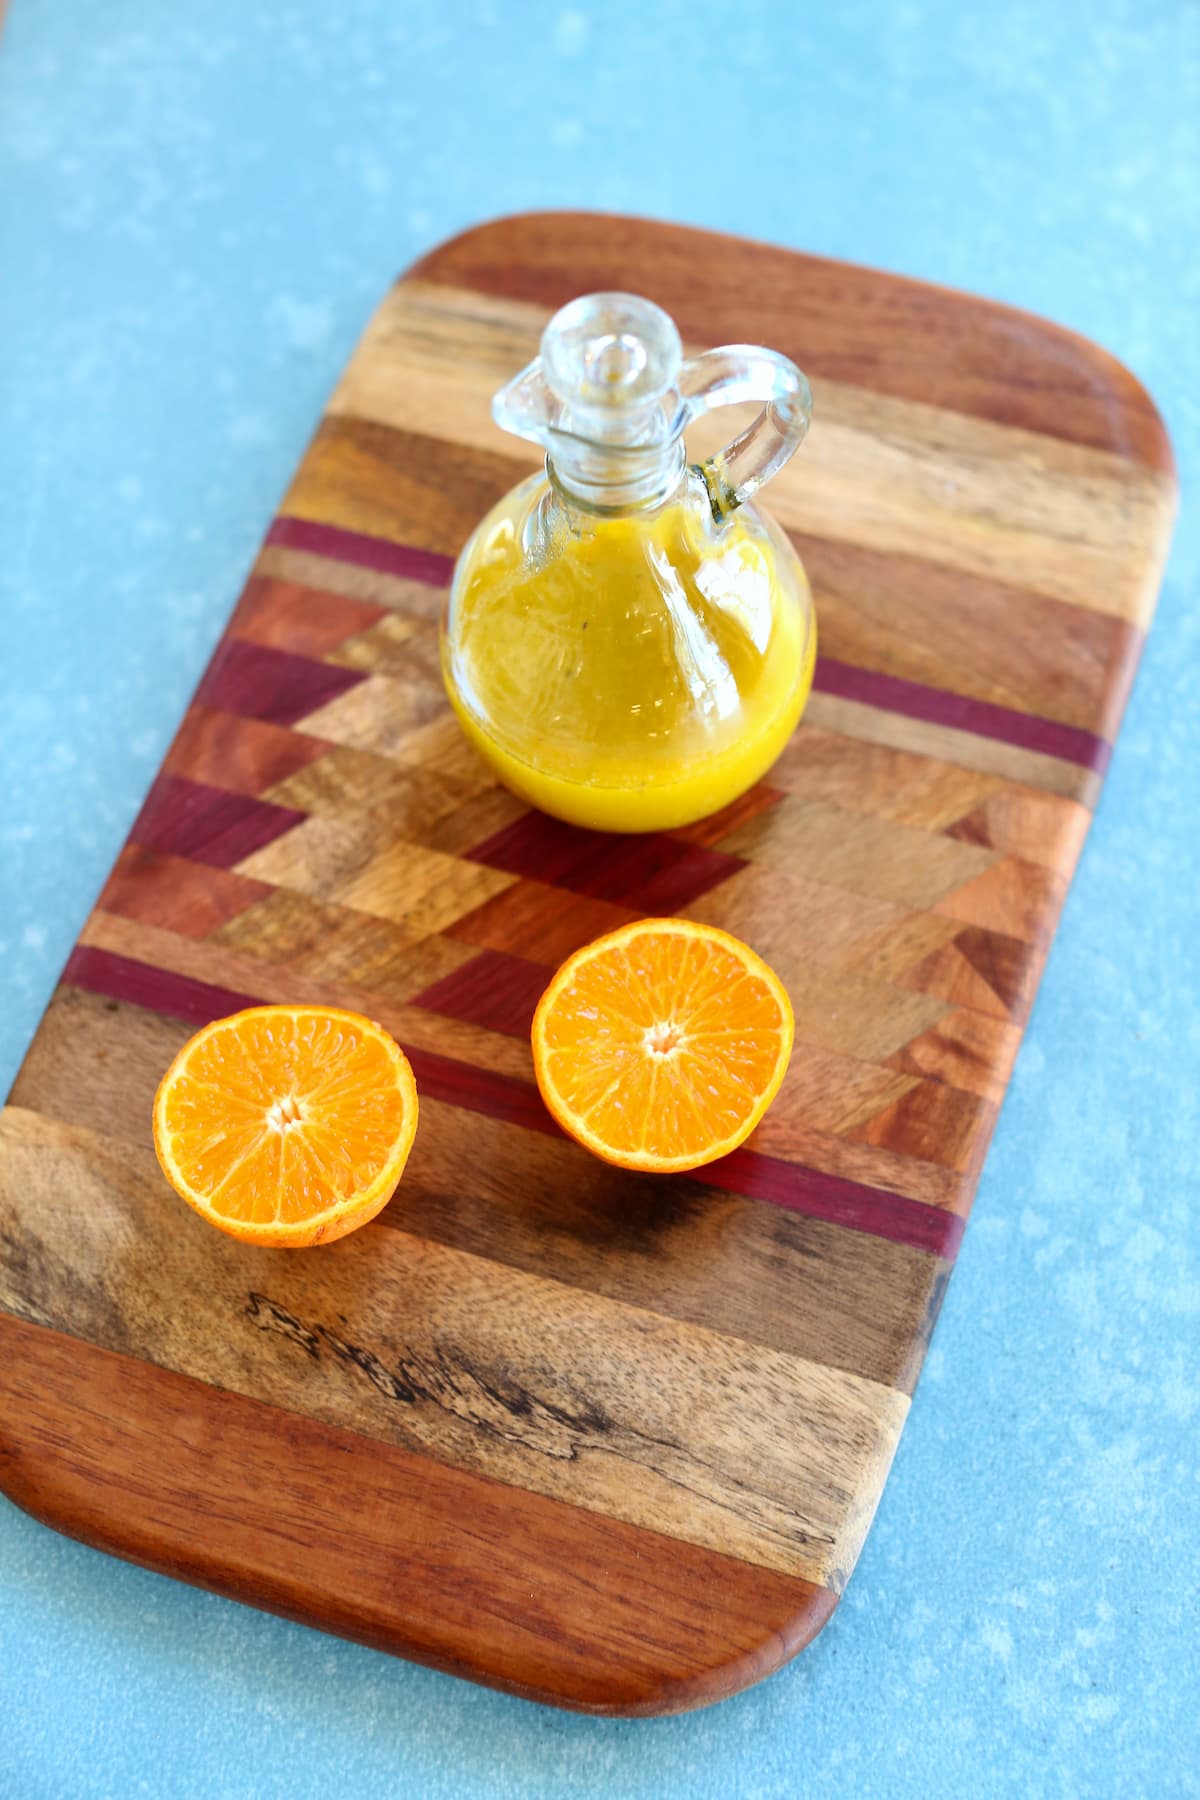 a cutting board with a bottle of vinagrette and an orange on it.